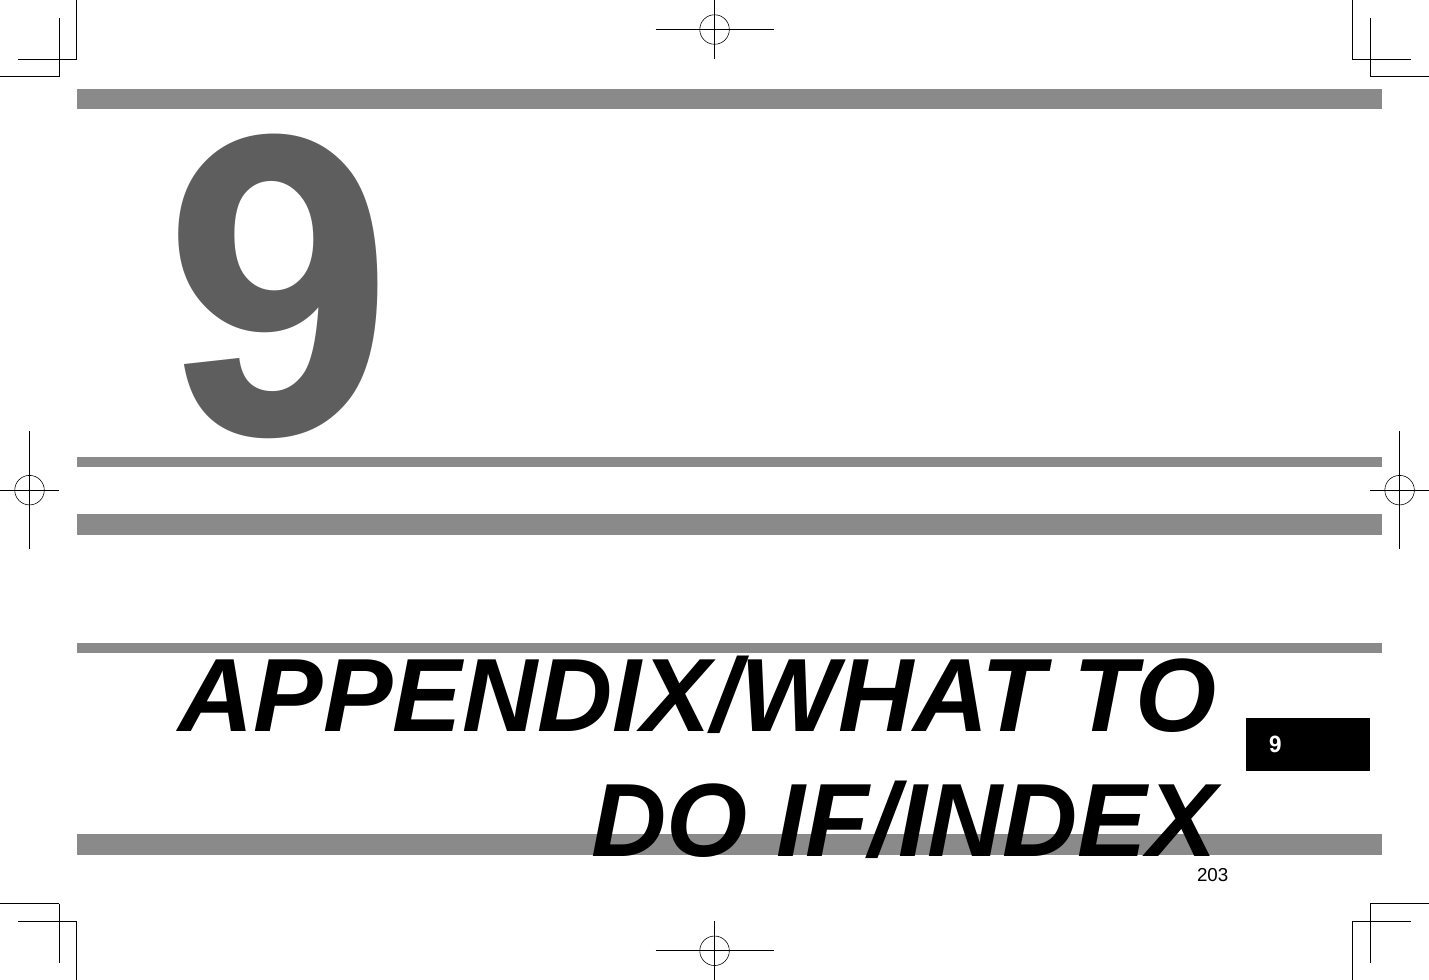 203APPENDIX/WHAT TO DO IF/INDEX99